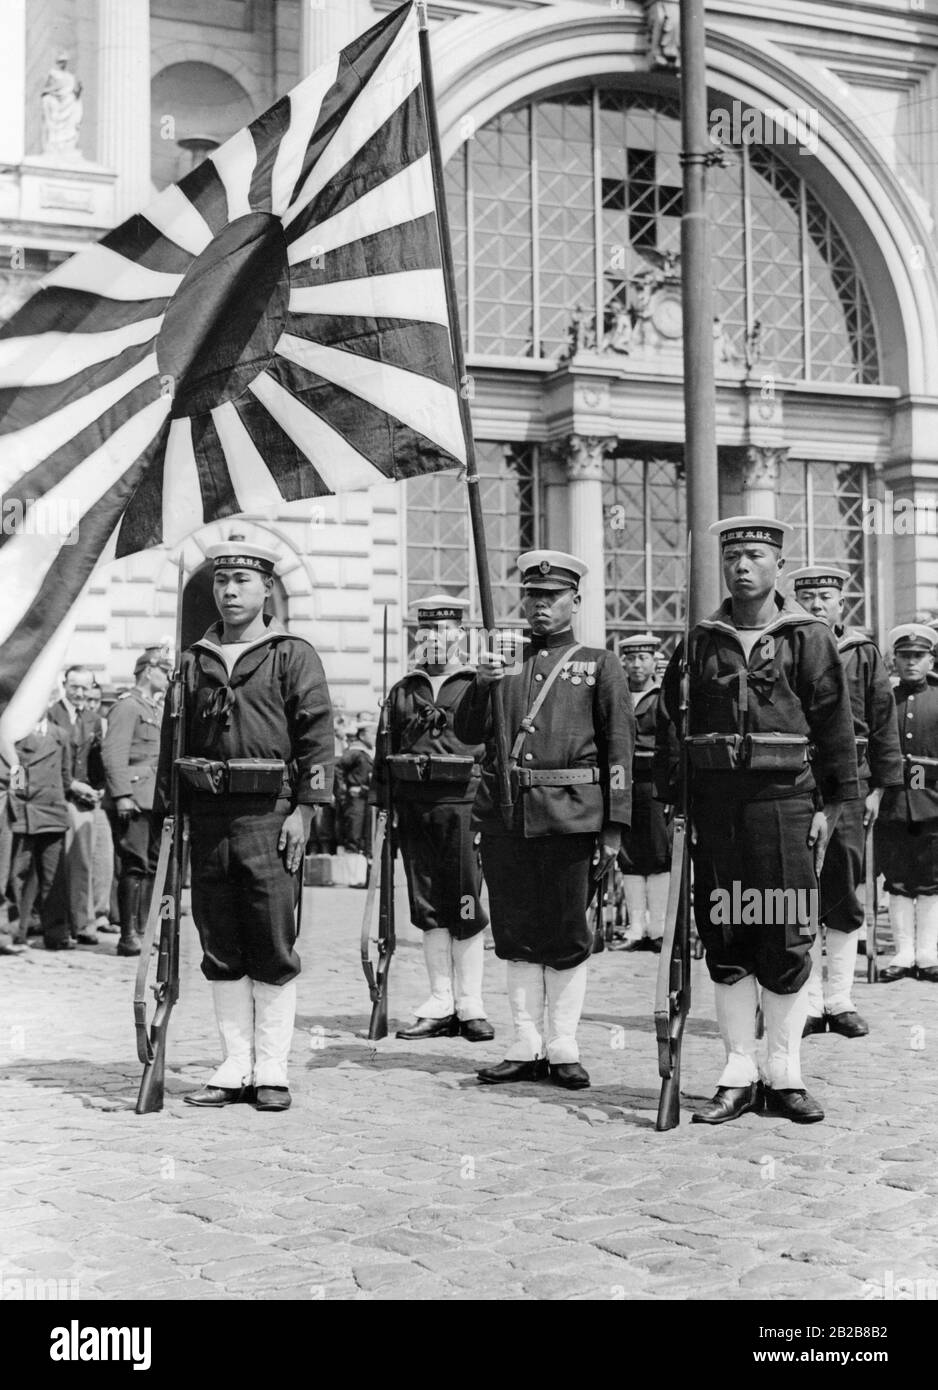 The crew of the cruiser Ashigara of the Imperial Japanese Navy on a visit to Berlin, here at Lehrter Bahnhof on 25 May 1937. Stock Photo